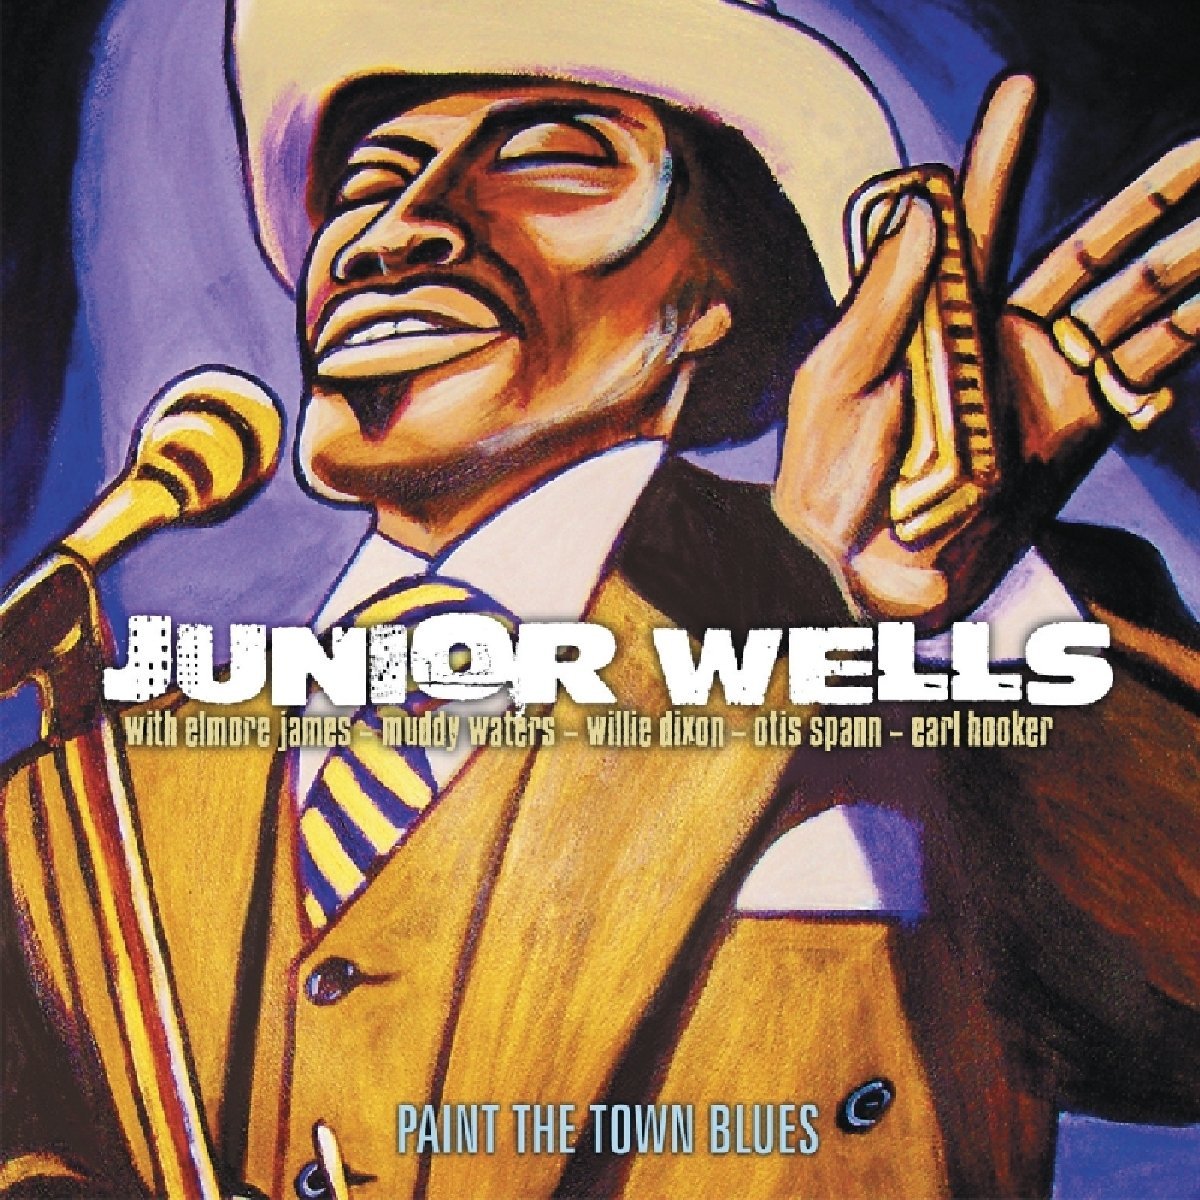 http://dave-myers.fxxks.com/images/paint_the_town_blues_junior%20_wells.jpg